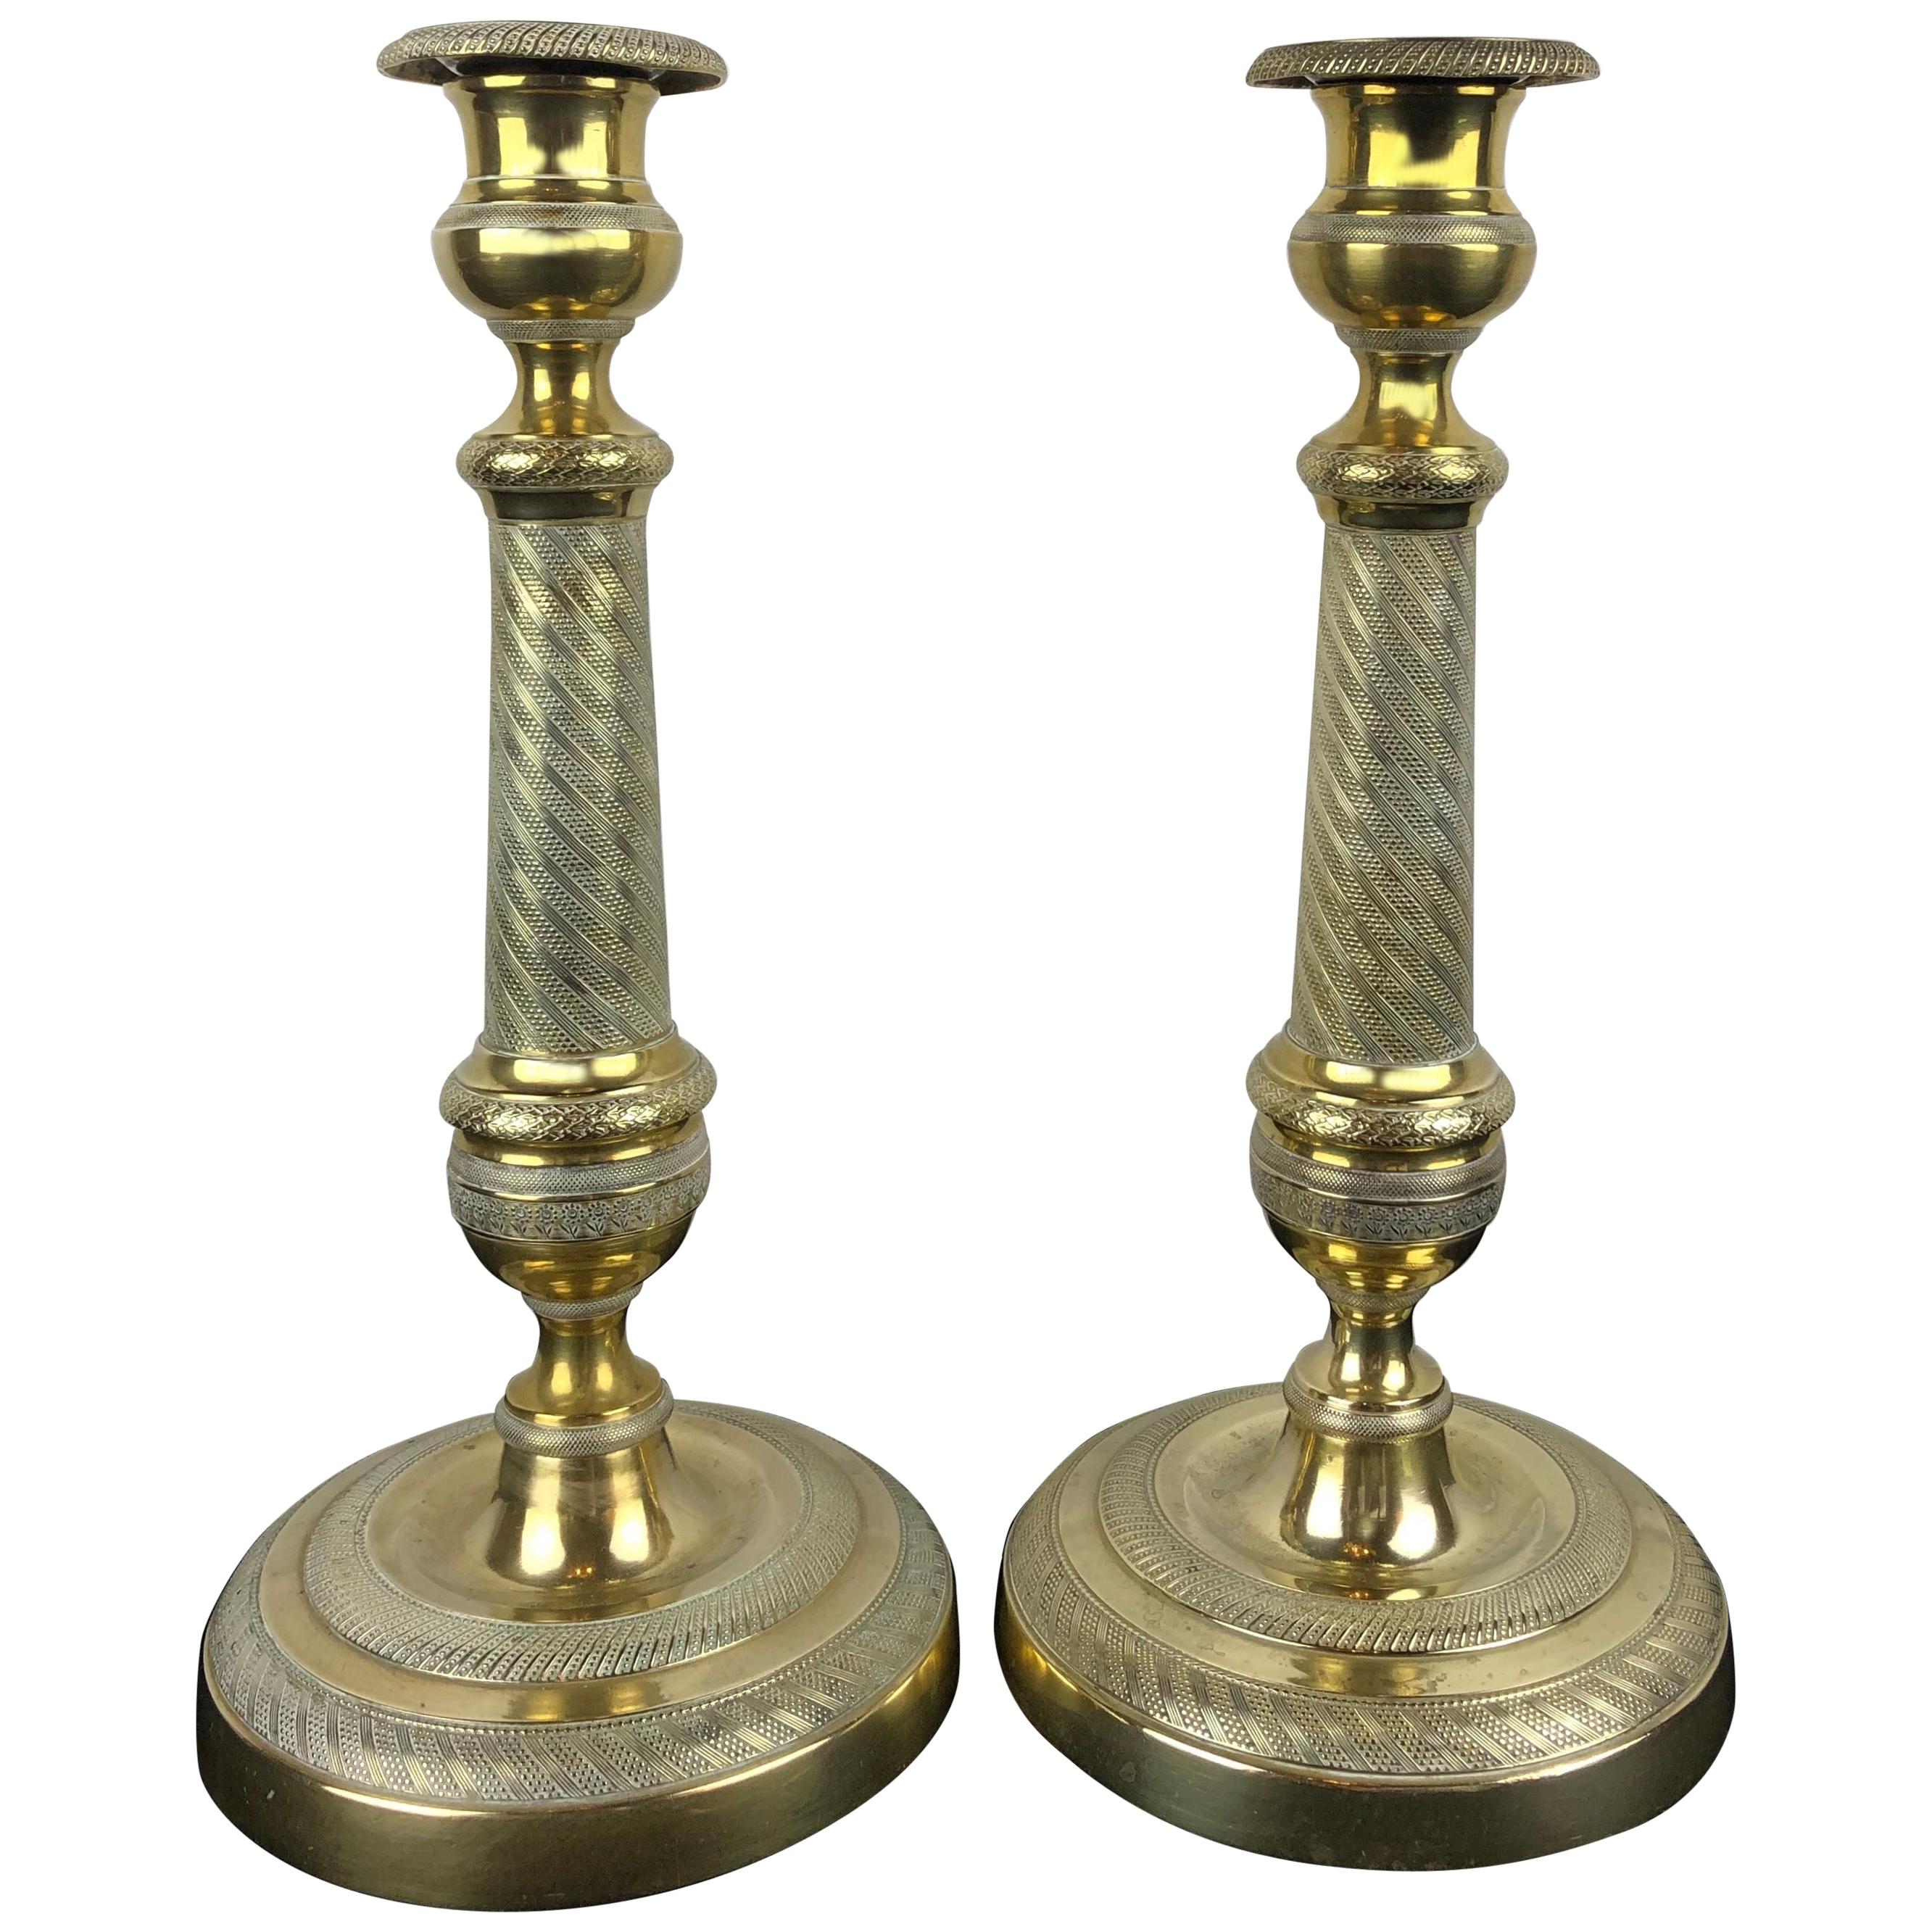 Fine Pair of Early 19th Century Empire Gilt Bronze Candlesticks For Sale